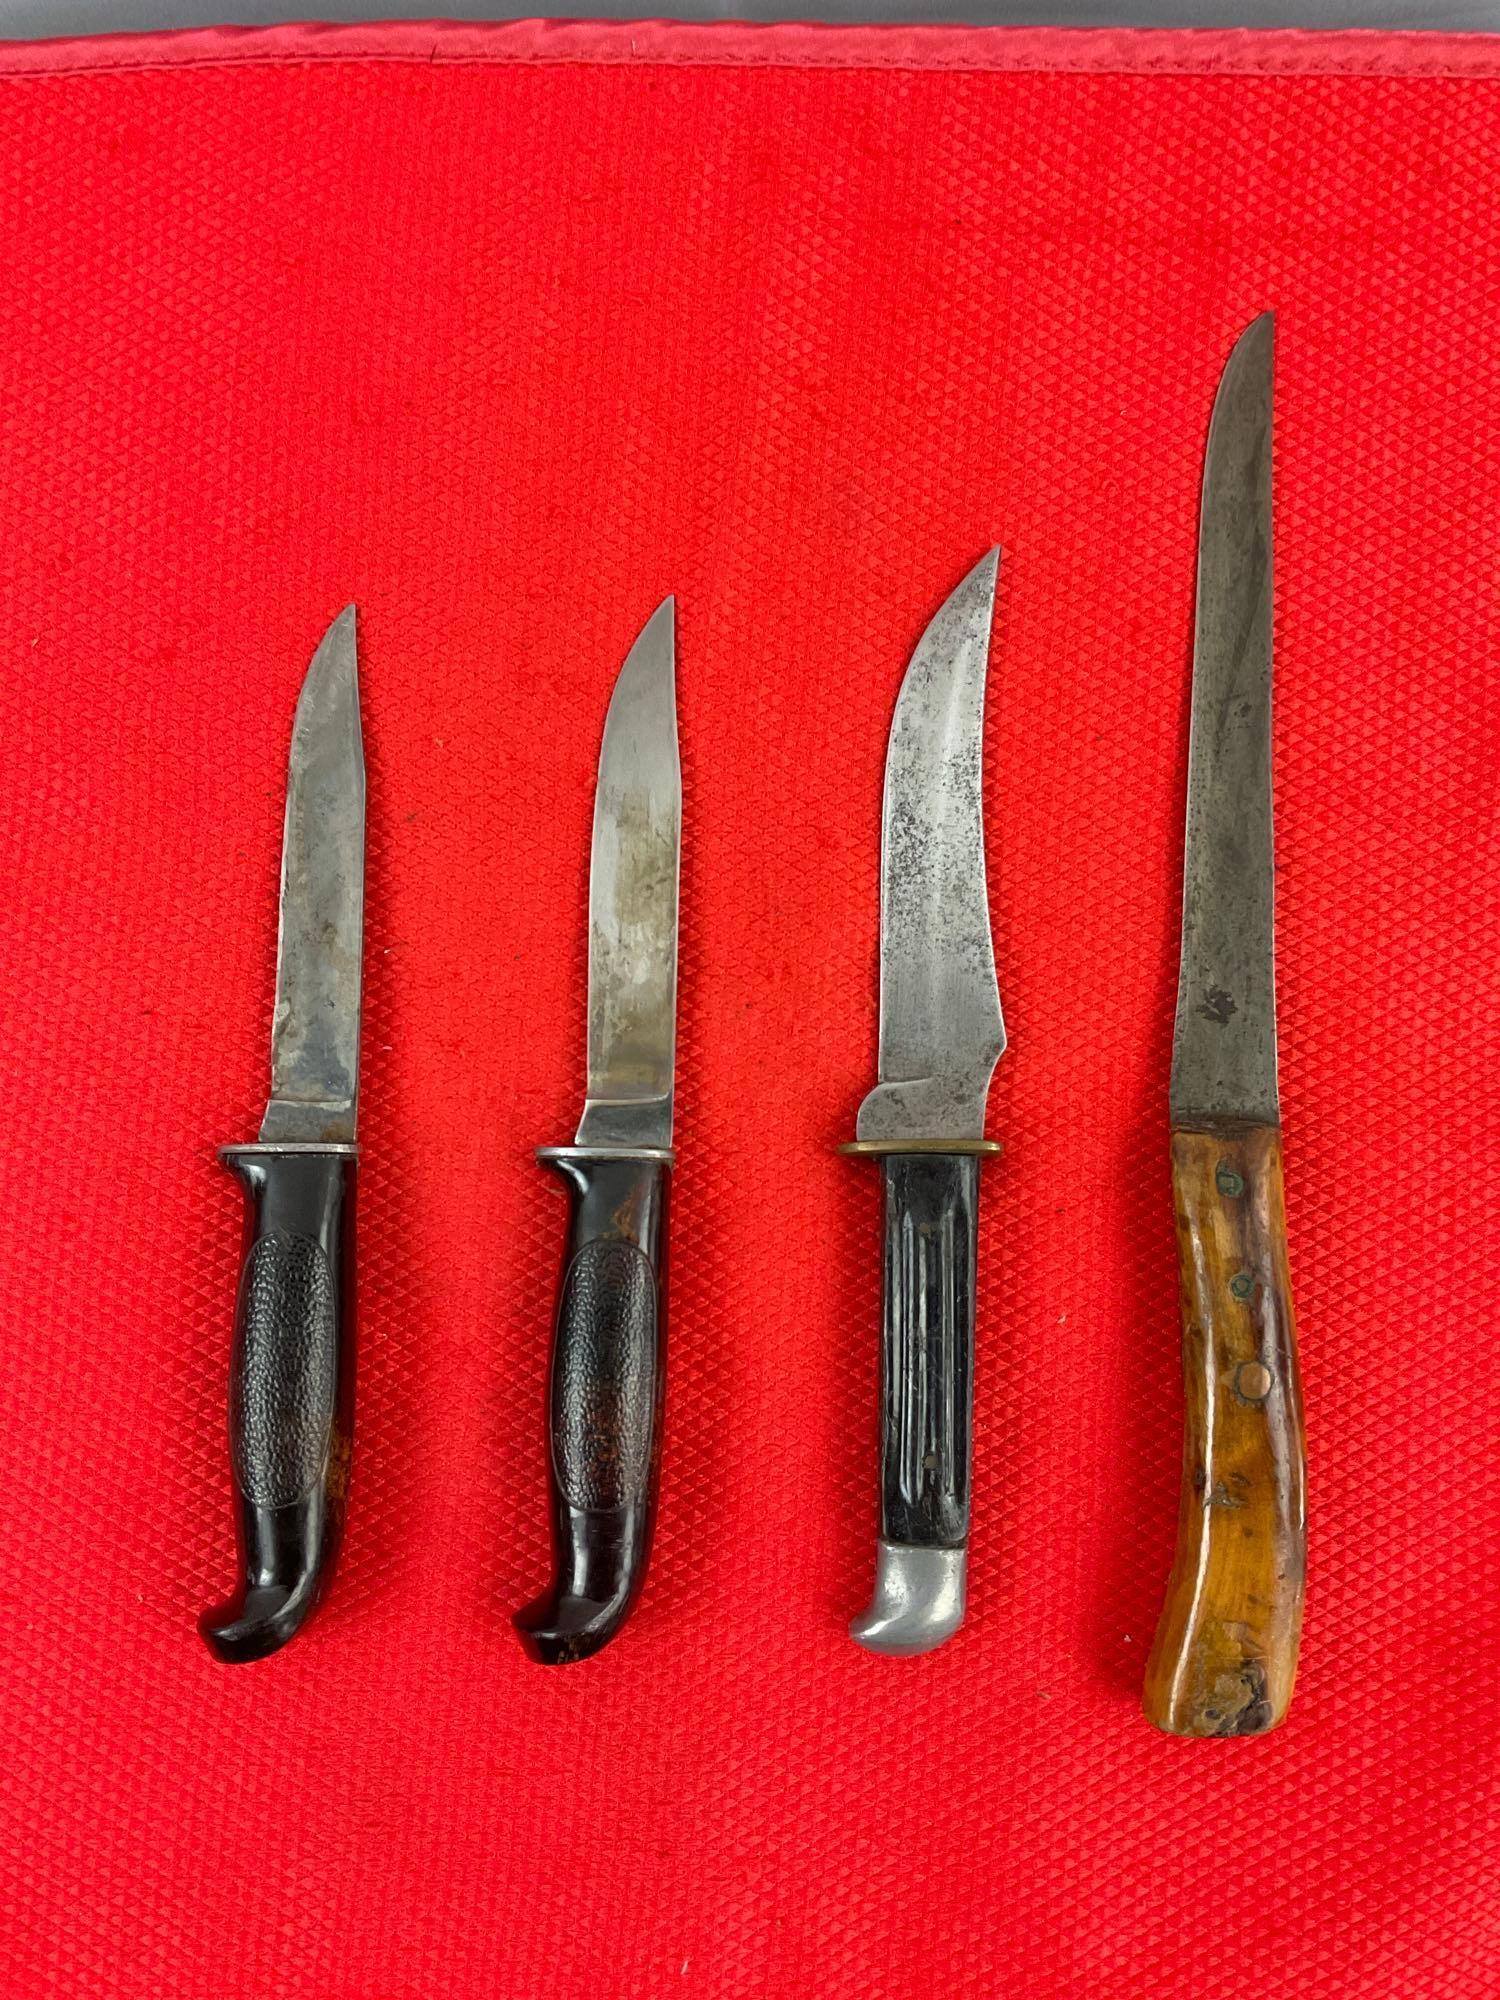 4 pcs Vintage Steel Fixed Blade Knives. Unknown Makers & Models. No Hallmarks. See pics.